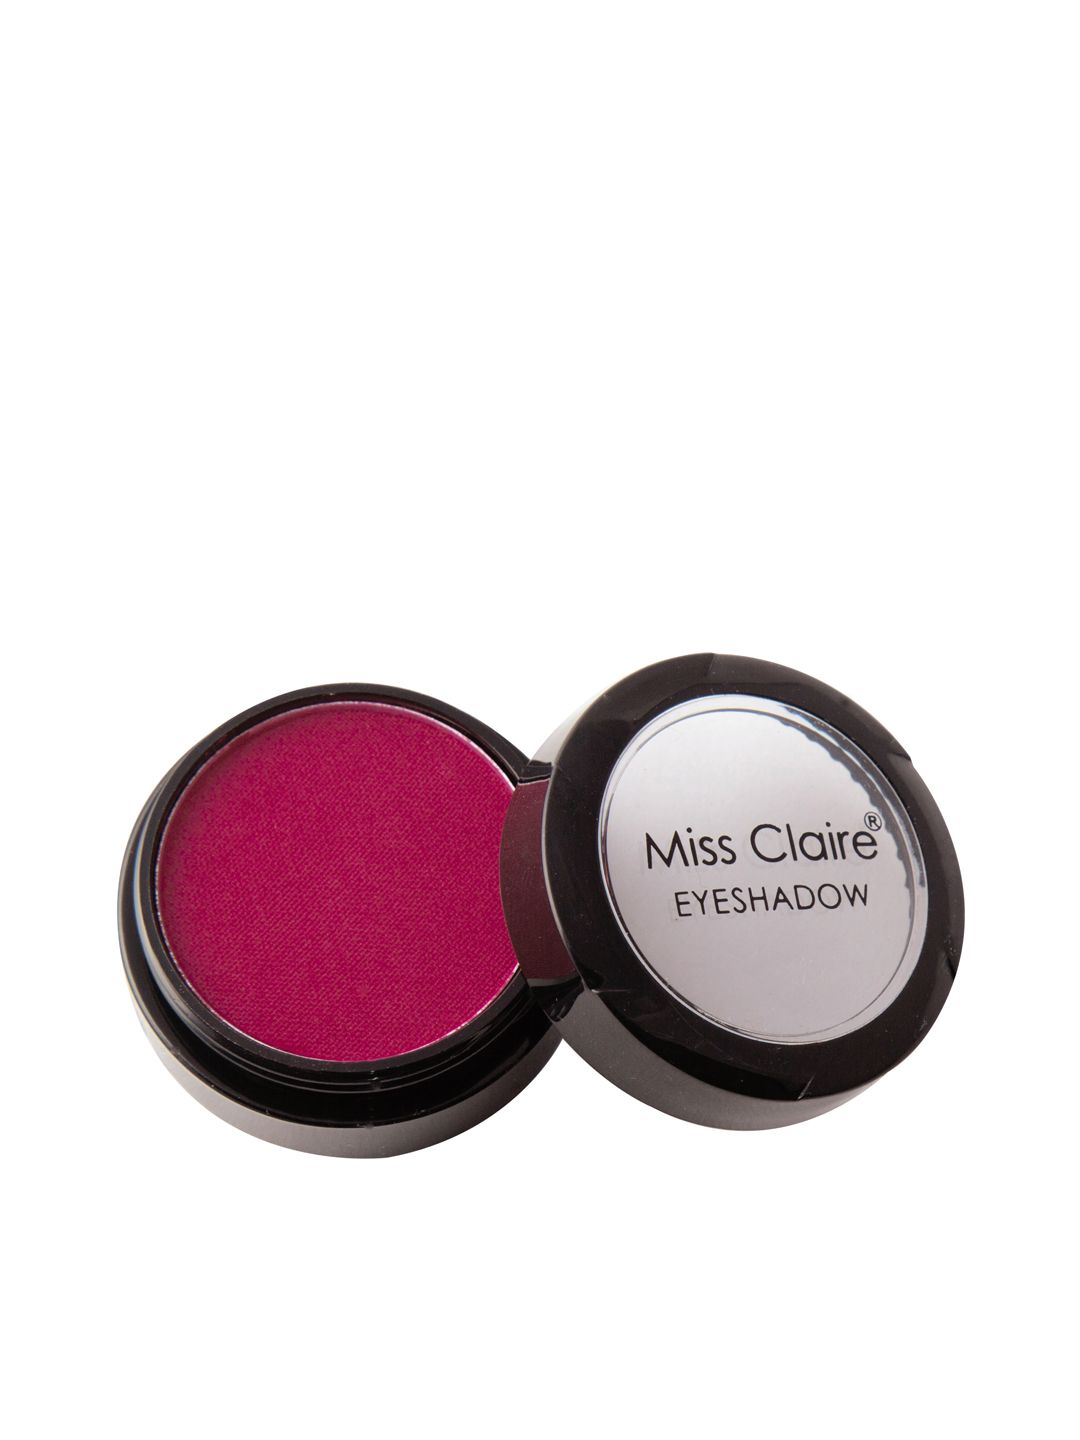 Miss Claire 0507 Single Eyeshadow 2 g Price in India